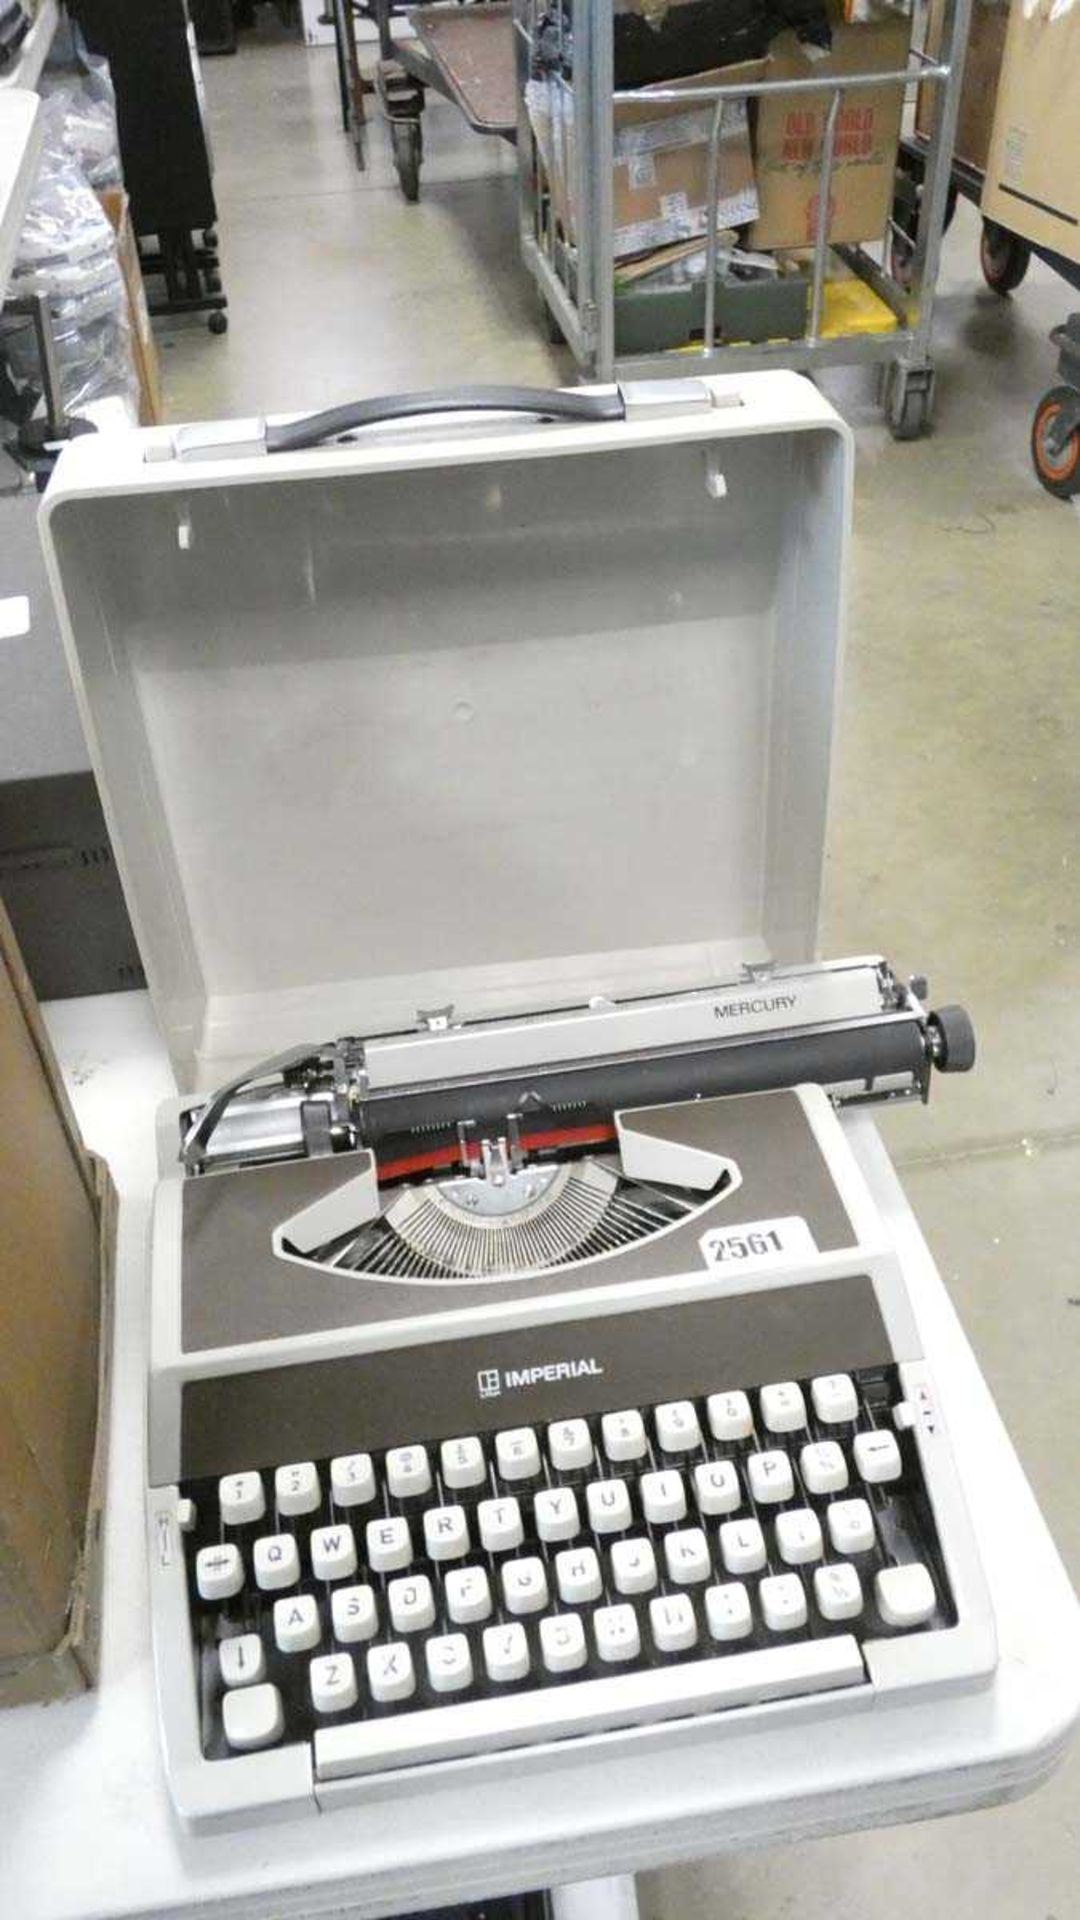 Mercury Imperial typewriter with case